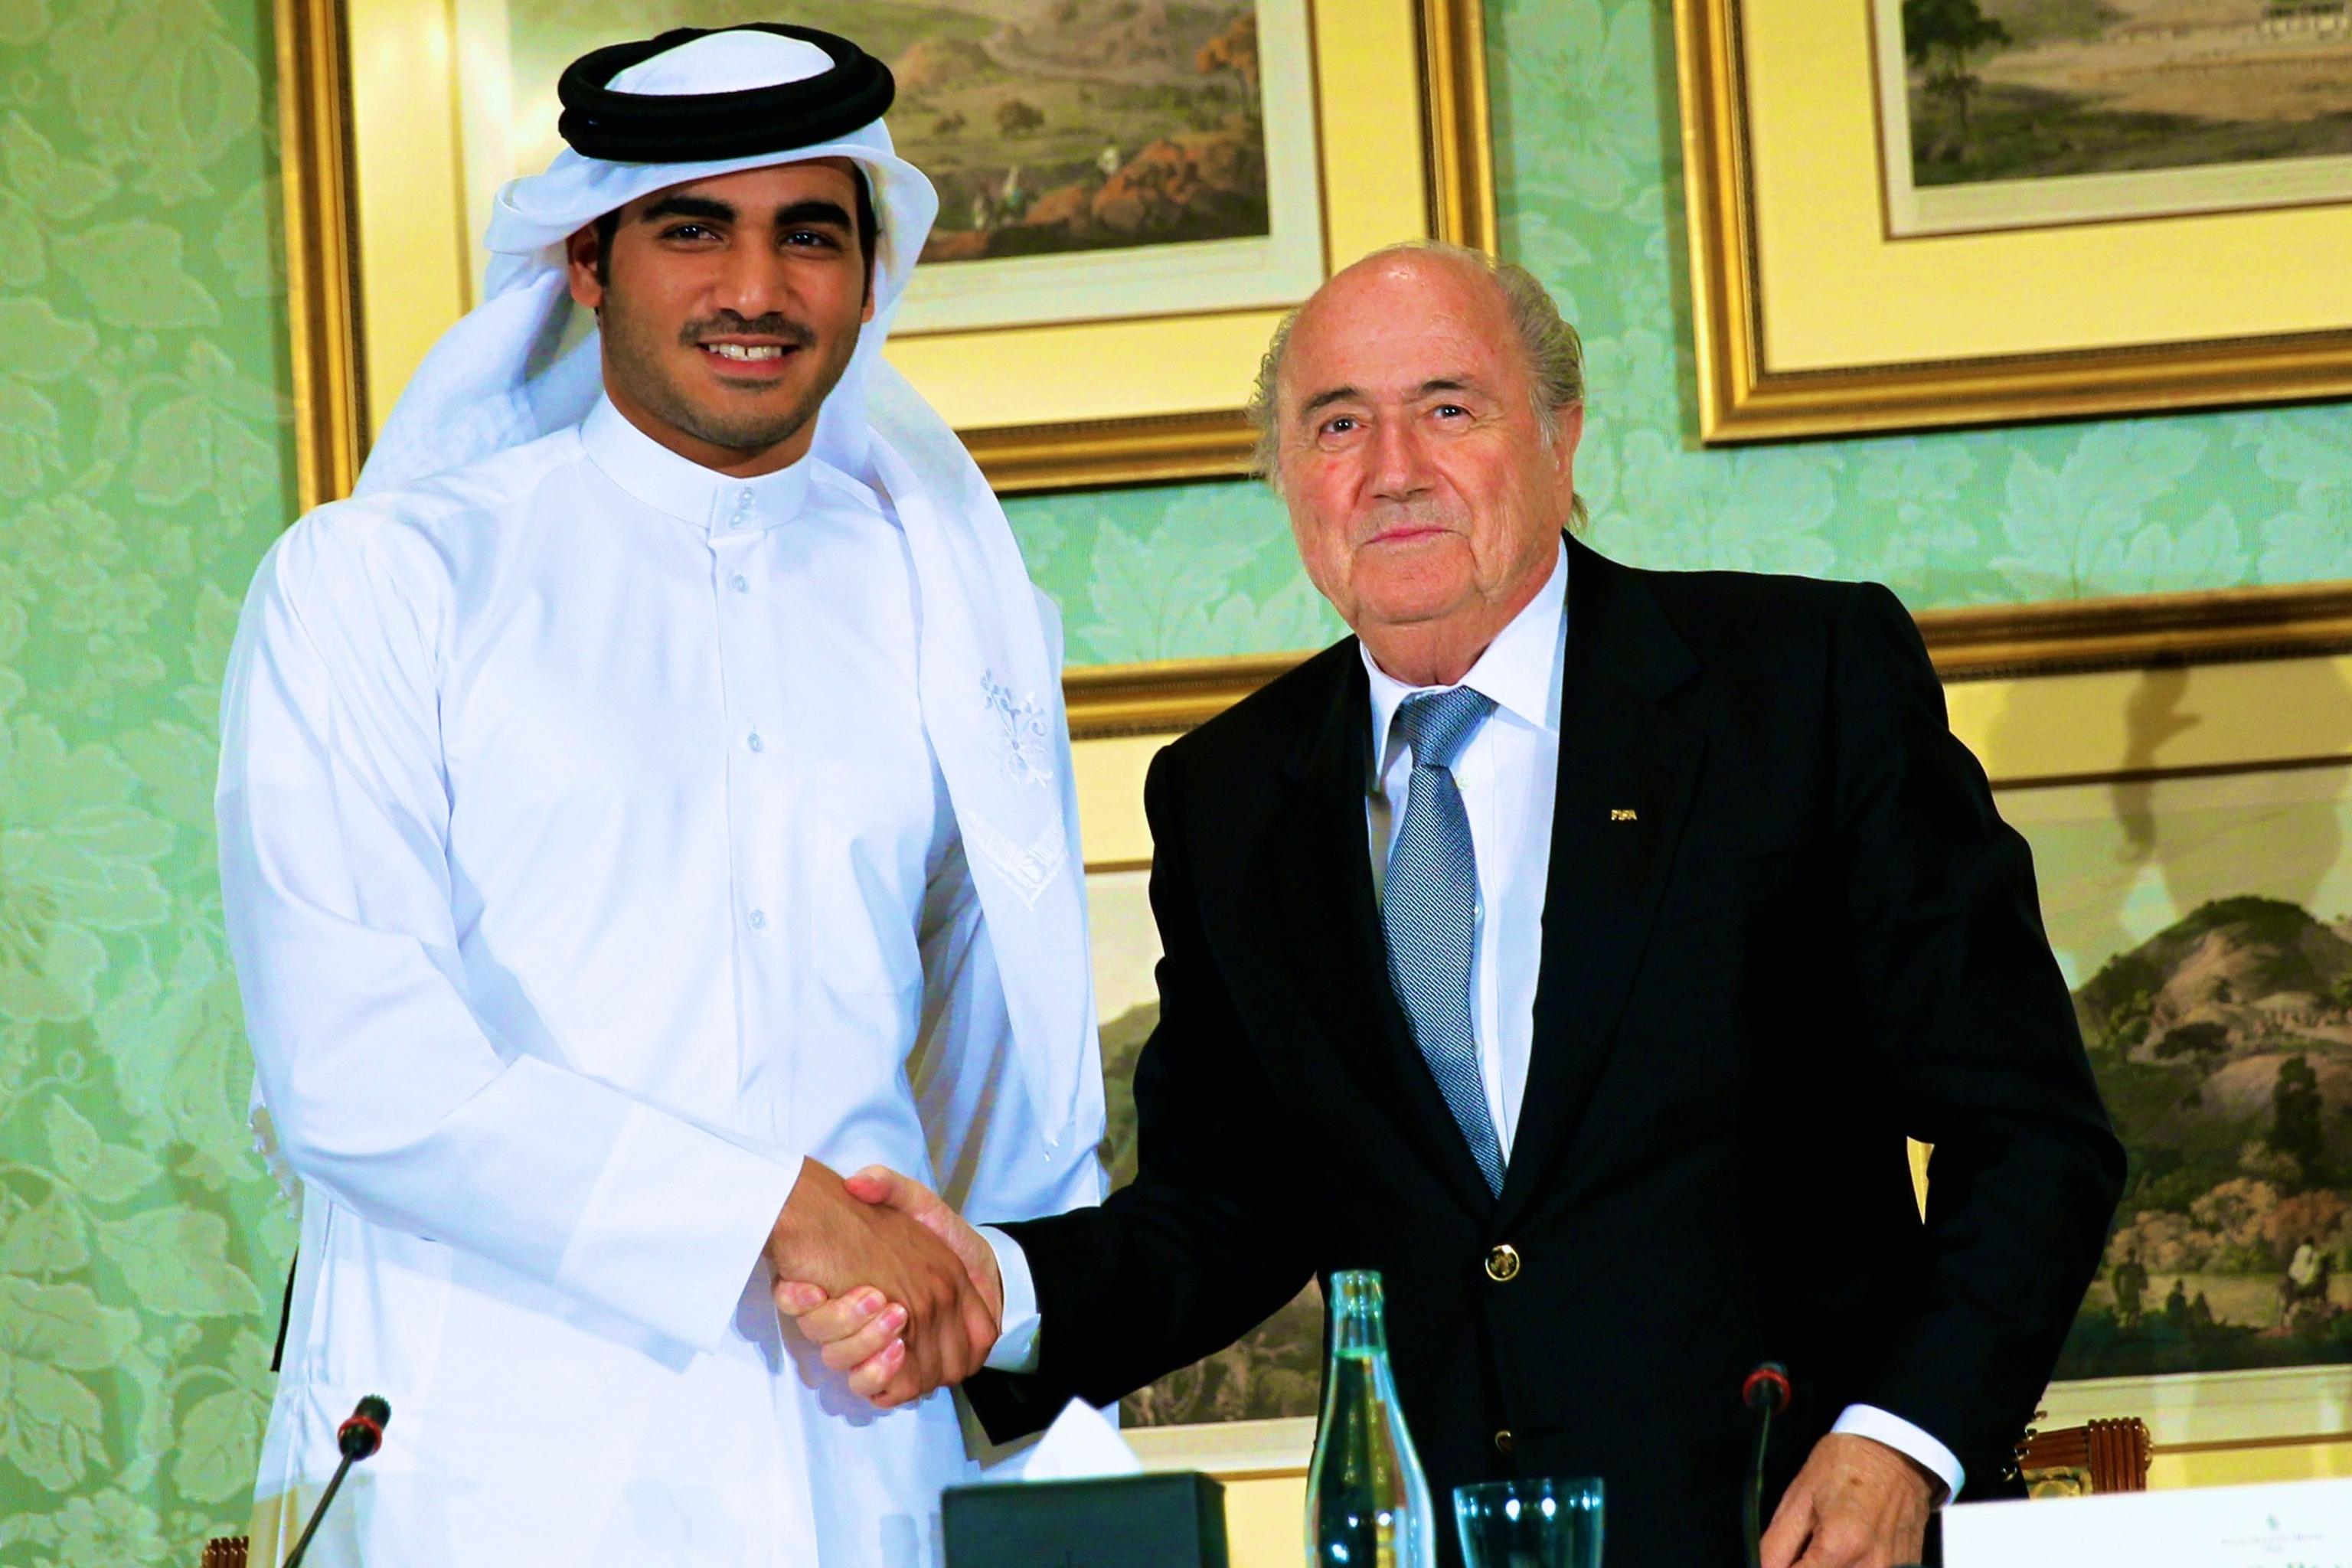 Who was bribed for Qatar?